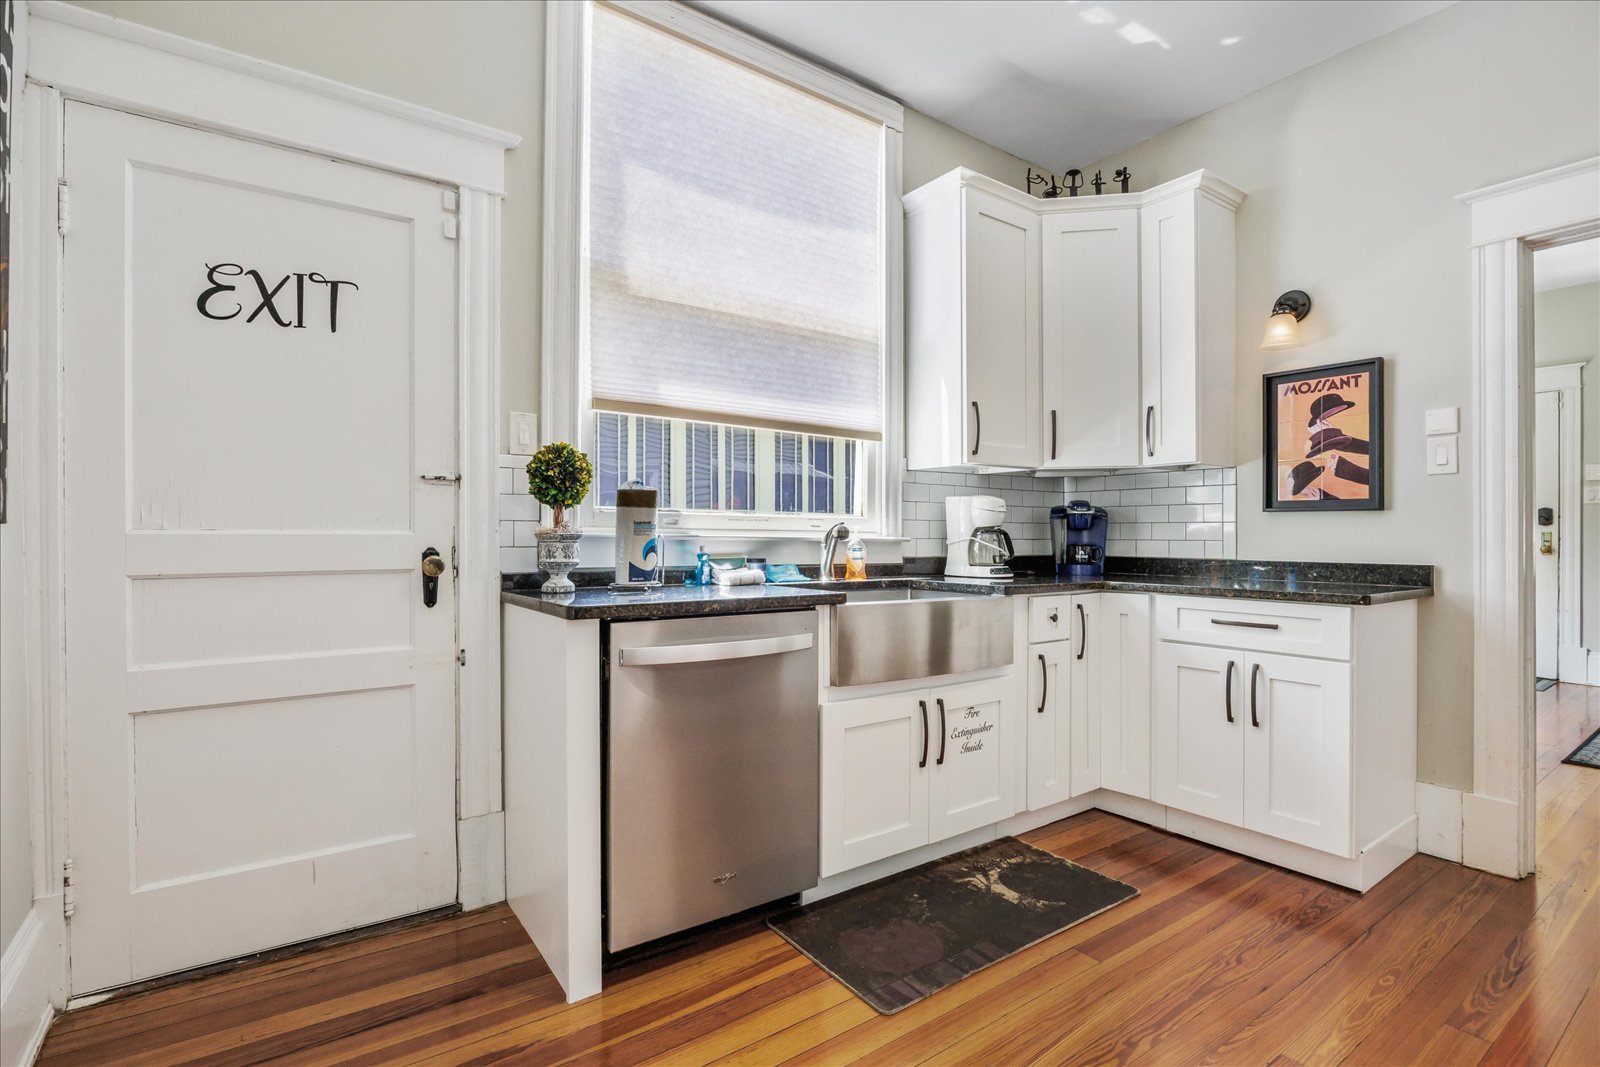 Unit B – The quaint kitchen offers ample space & all the comforts of home